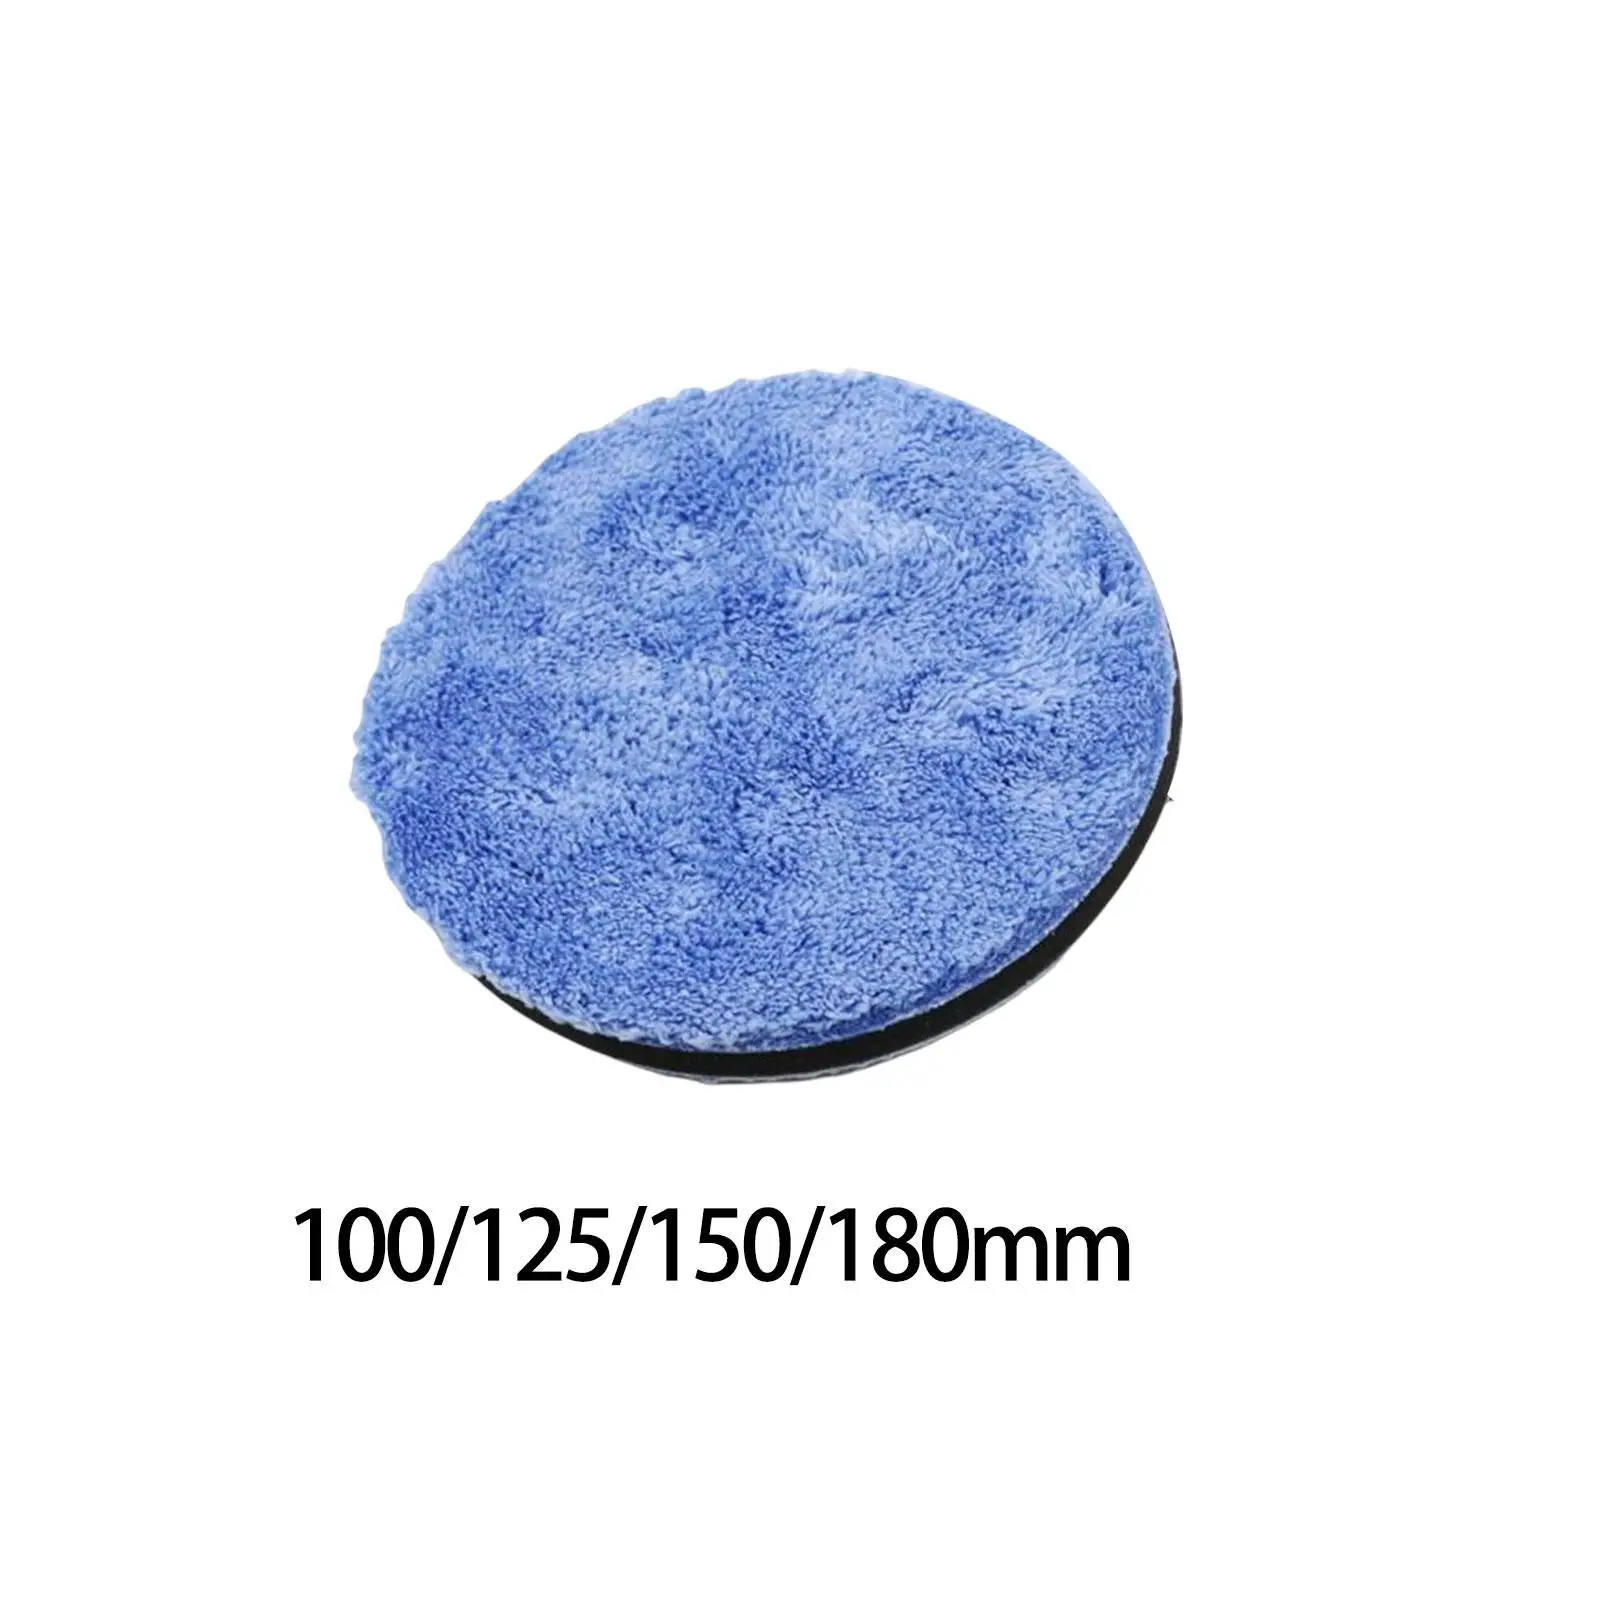 Microfiber Polishing Pad Multifunctional Soft Blue Waxing Sponge for Auto Tool Car Interior Exterior Cleaning Boats